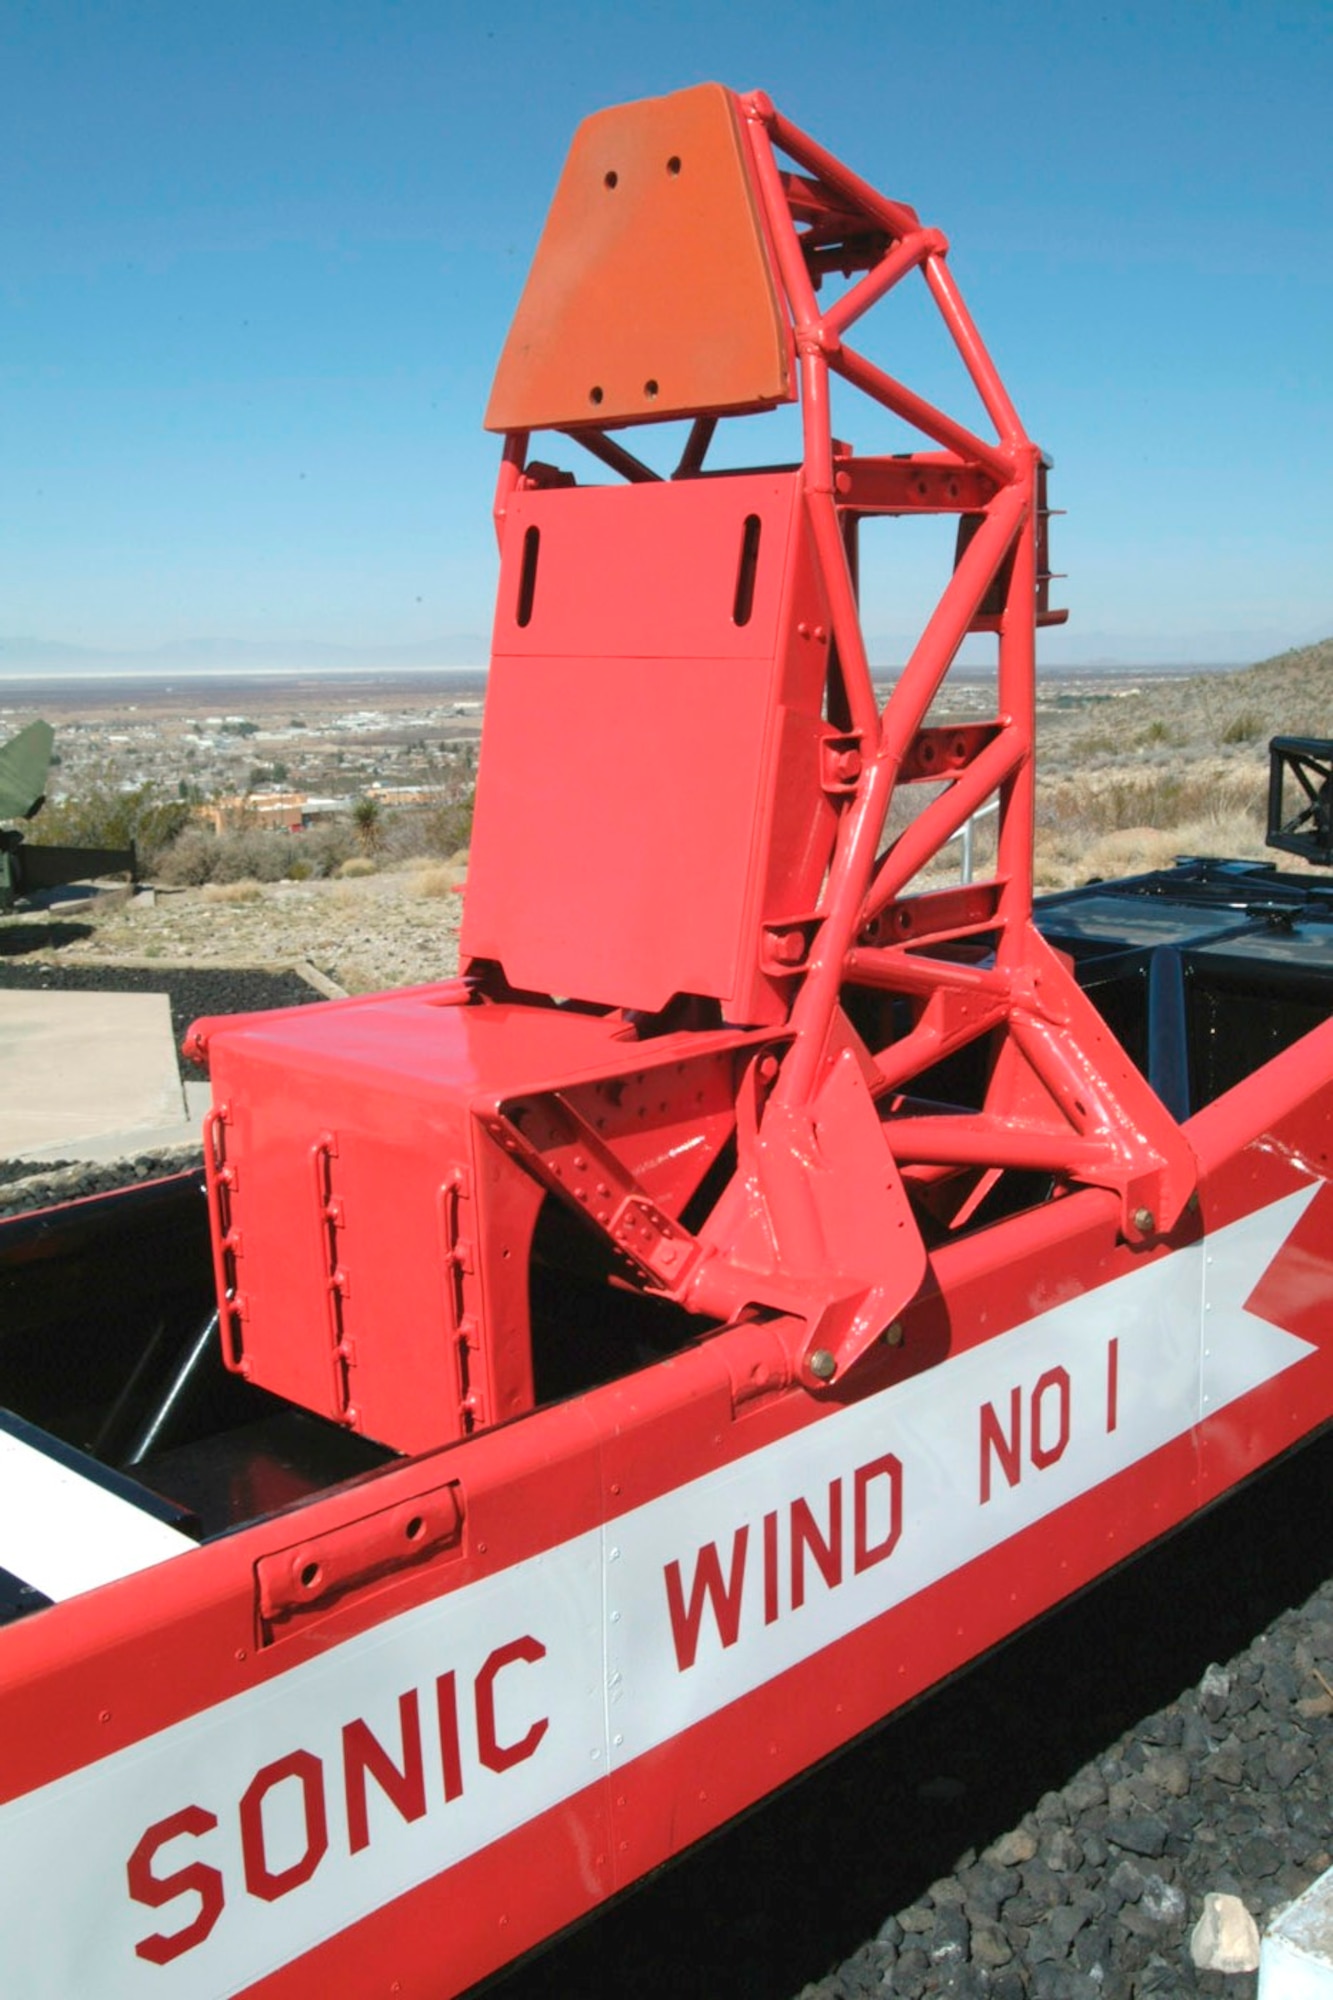 On December 10, 1954, Col. John P. Stapp propelled down the Holloman High Speed Test Track aboard the Sonic Wind Rocket Sled 1 at a rate of 632 miles per hour. The purpose of this experiment was to see at what speed a pilot could safely eject. The Sonic Wind 1, the sled Stapp used for that test, is now displayed at the New Mexico Museum of Space History. (Courtesy Photo)